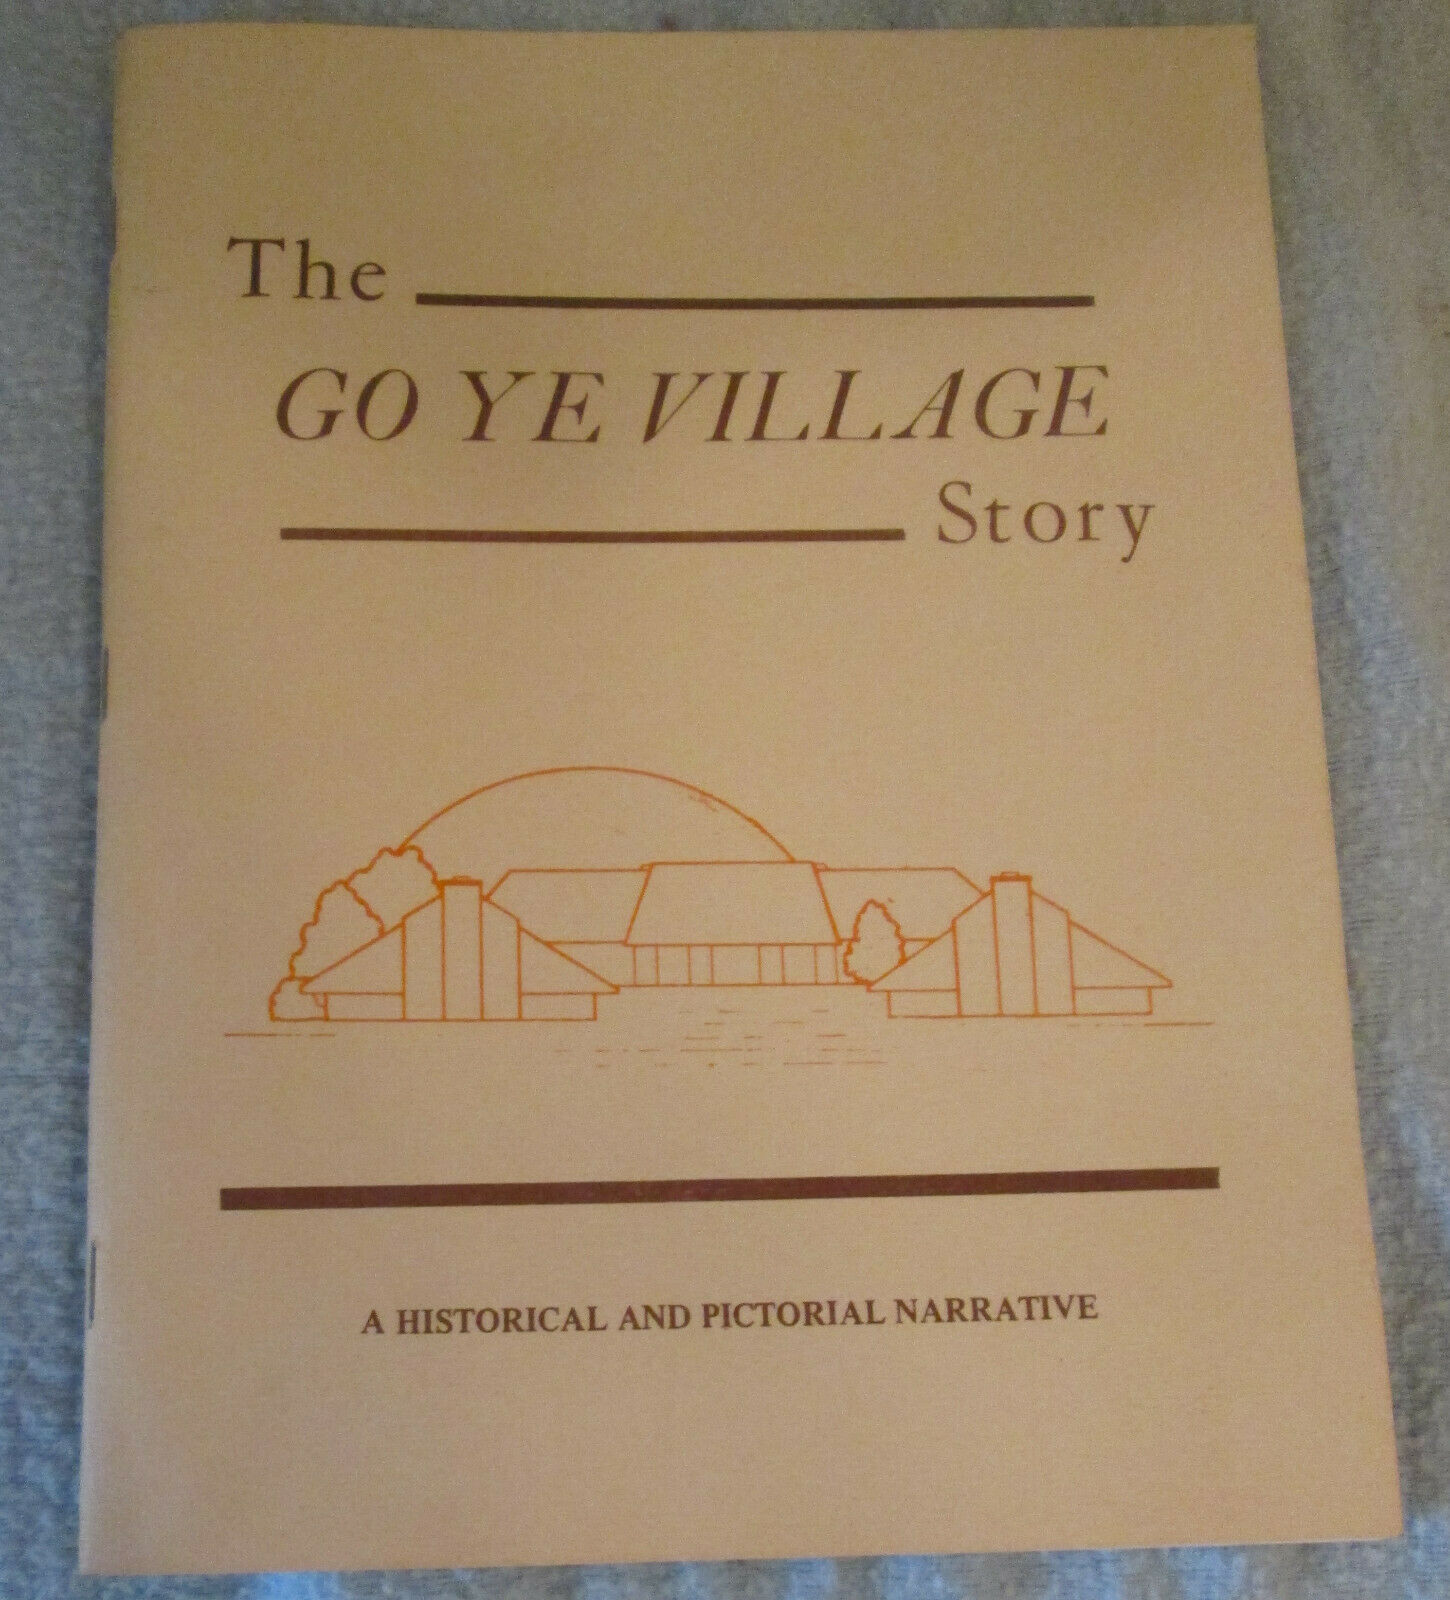 Primary image for HISTORICAL AND PICTORIAL NARRATIVE MAGAZINE  "GO YE VILLAGE RETIREMENT" 